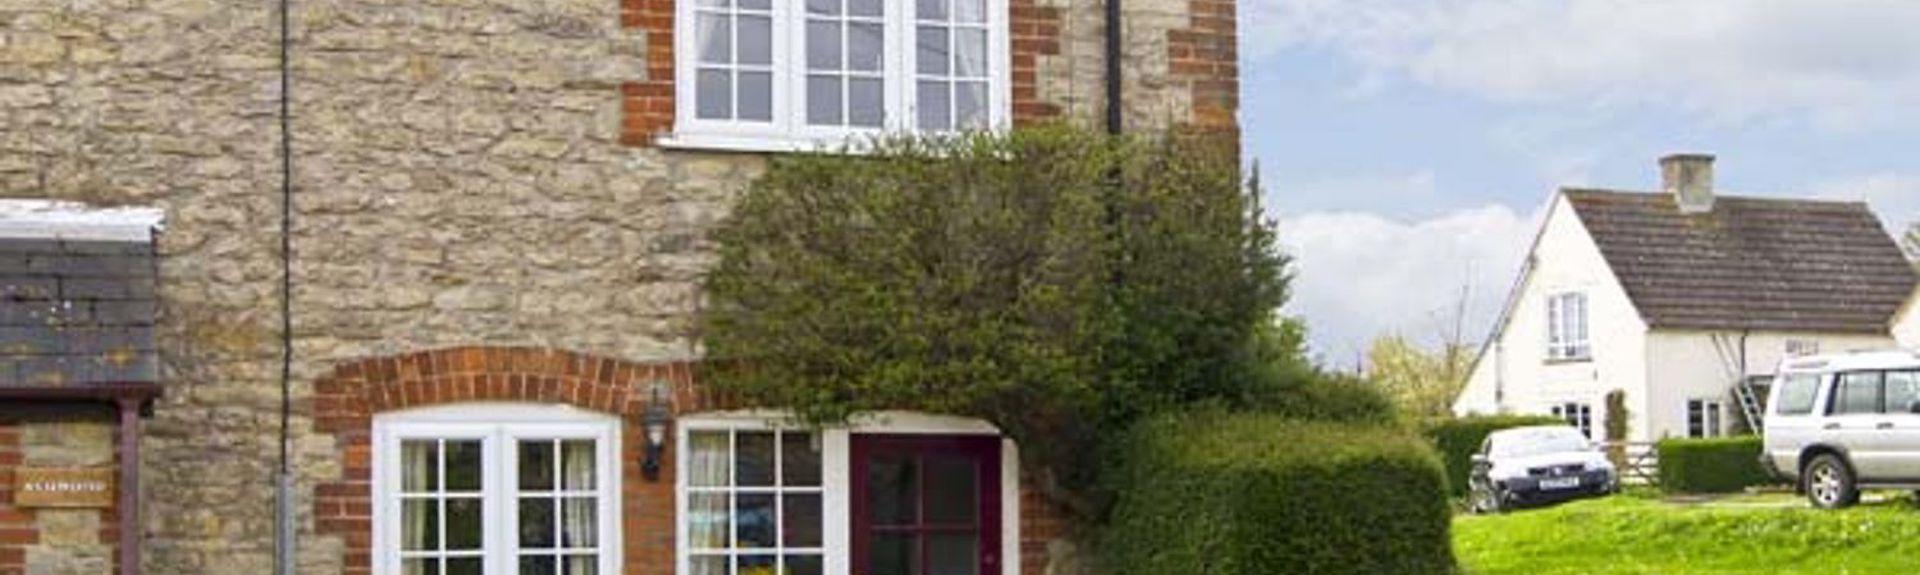 A semii-detached Dorset cottage overlooks a paved front courtyard for parking.